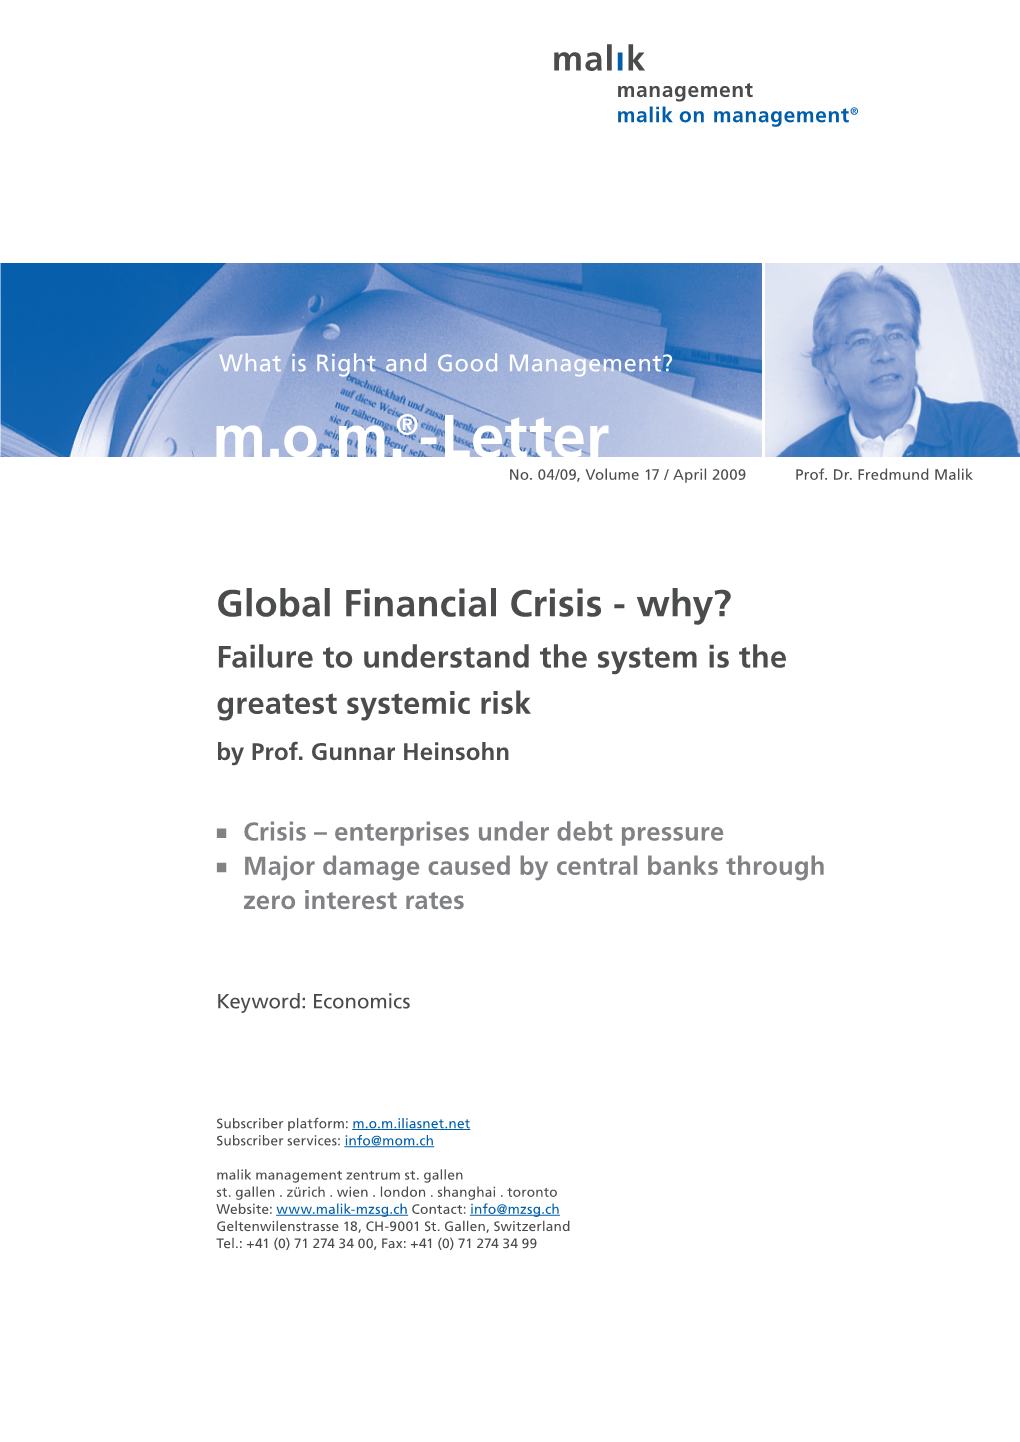 Global Financial Crisis - Why? Failure to Understand the System Is the Greatest Systemic Risk by Prof